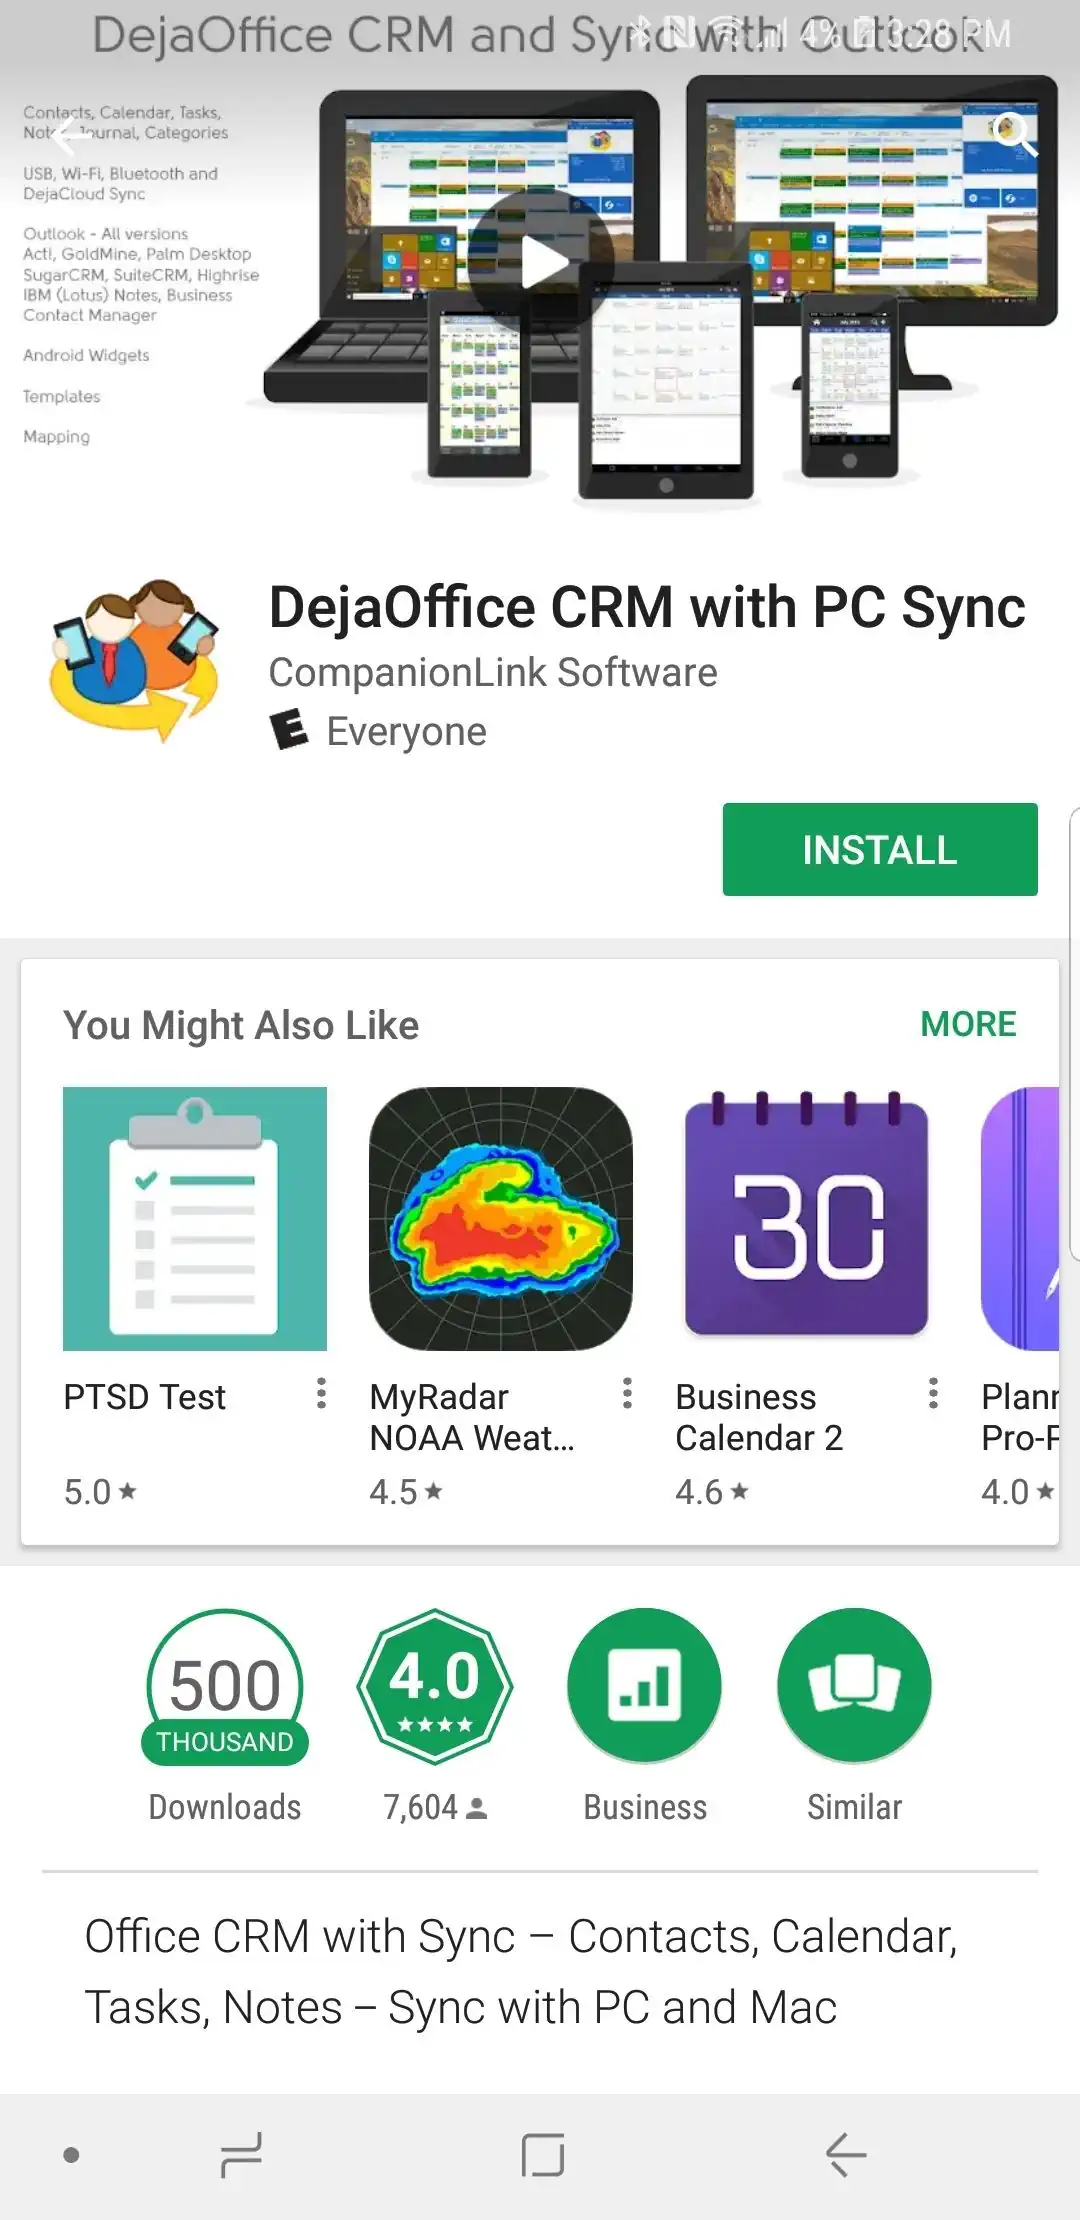 Download DejaOffice from the Google Play Store